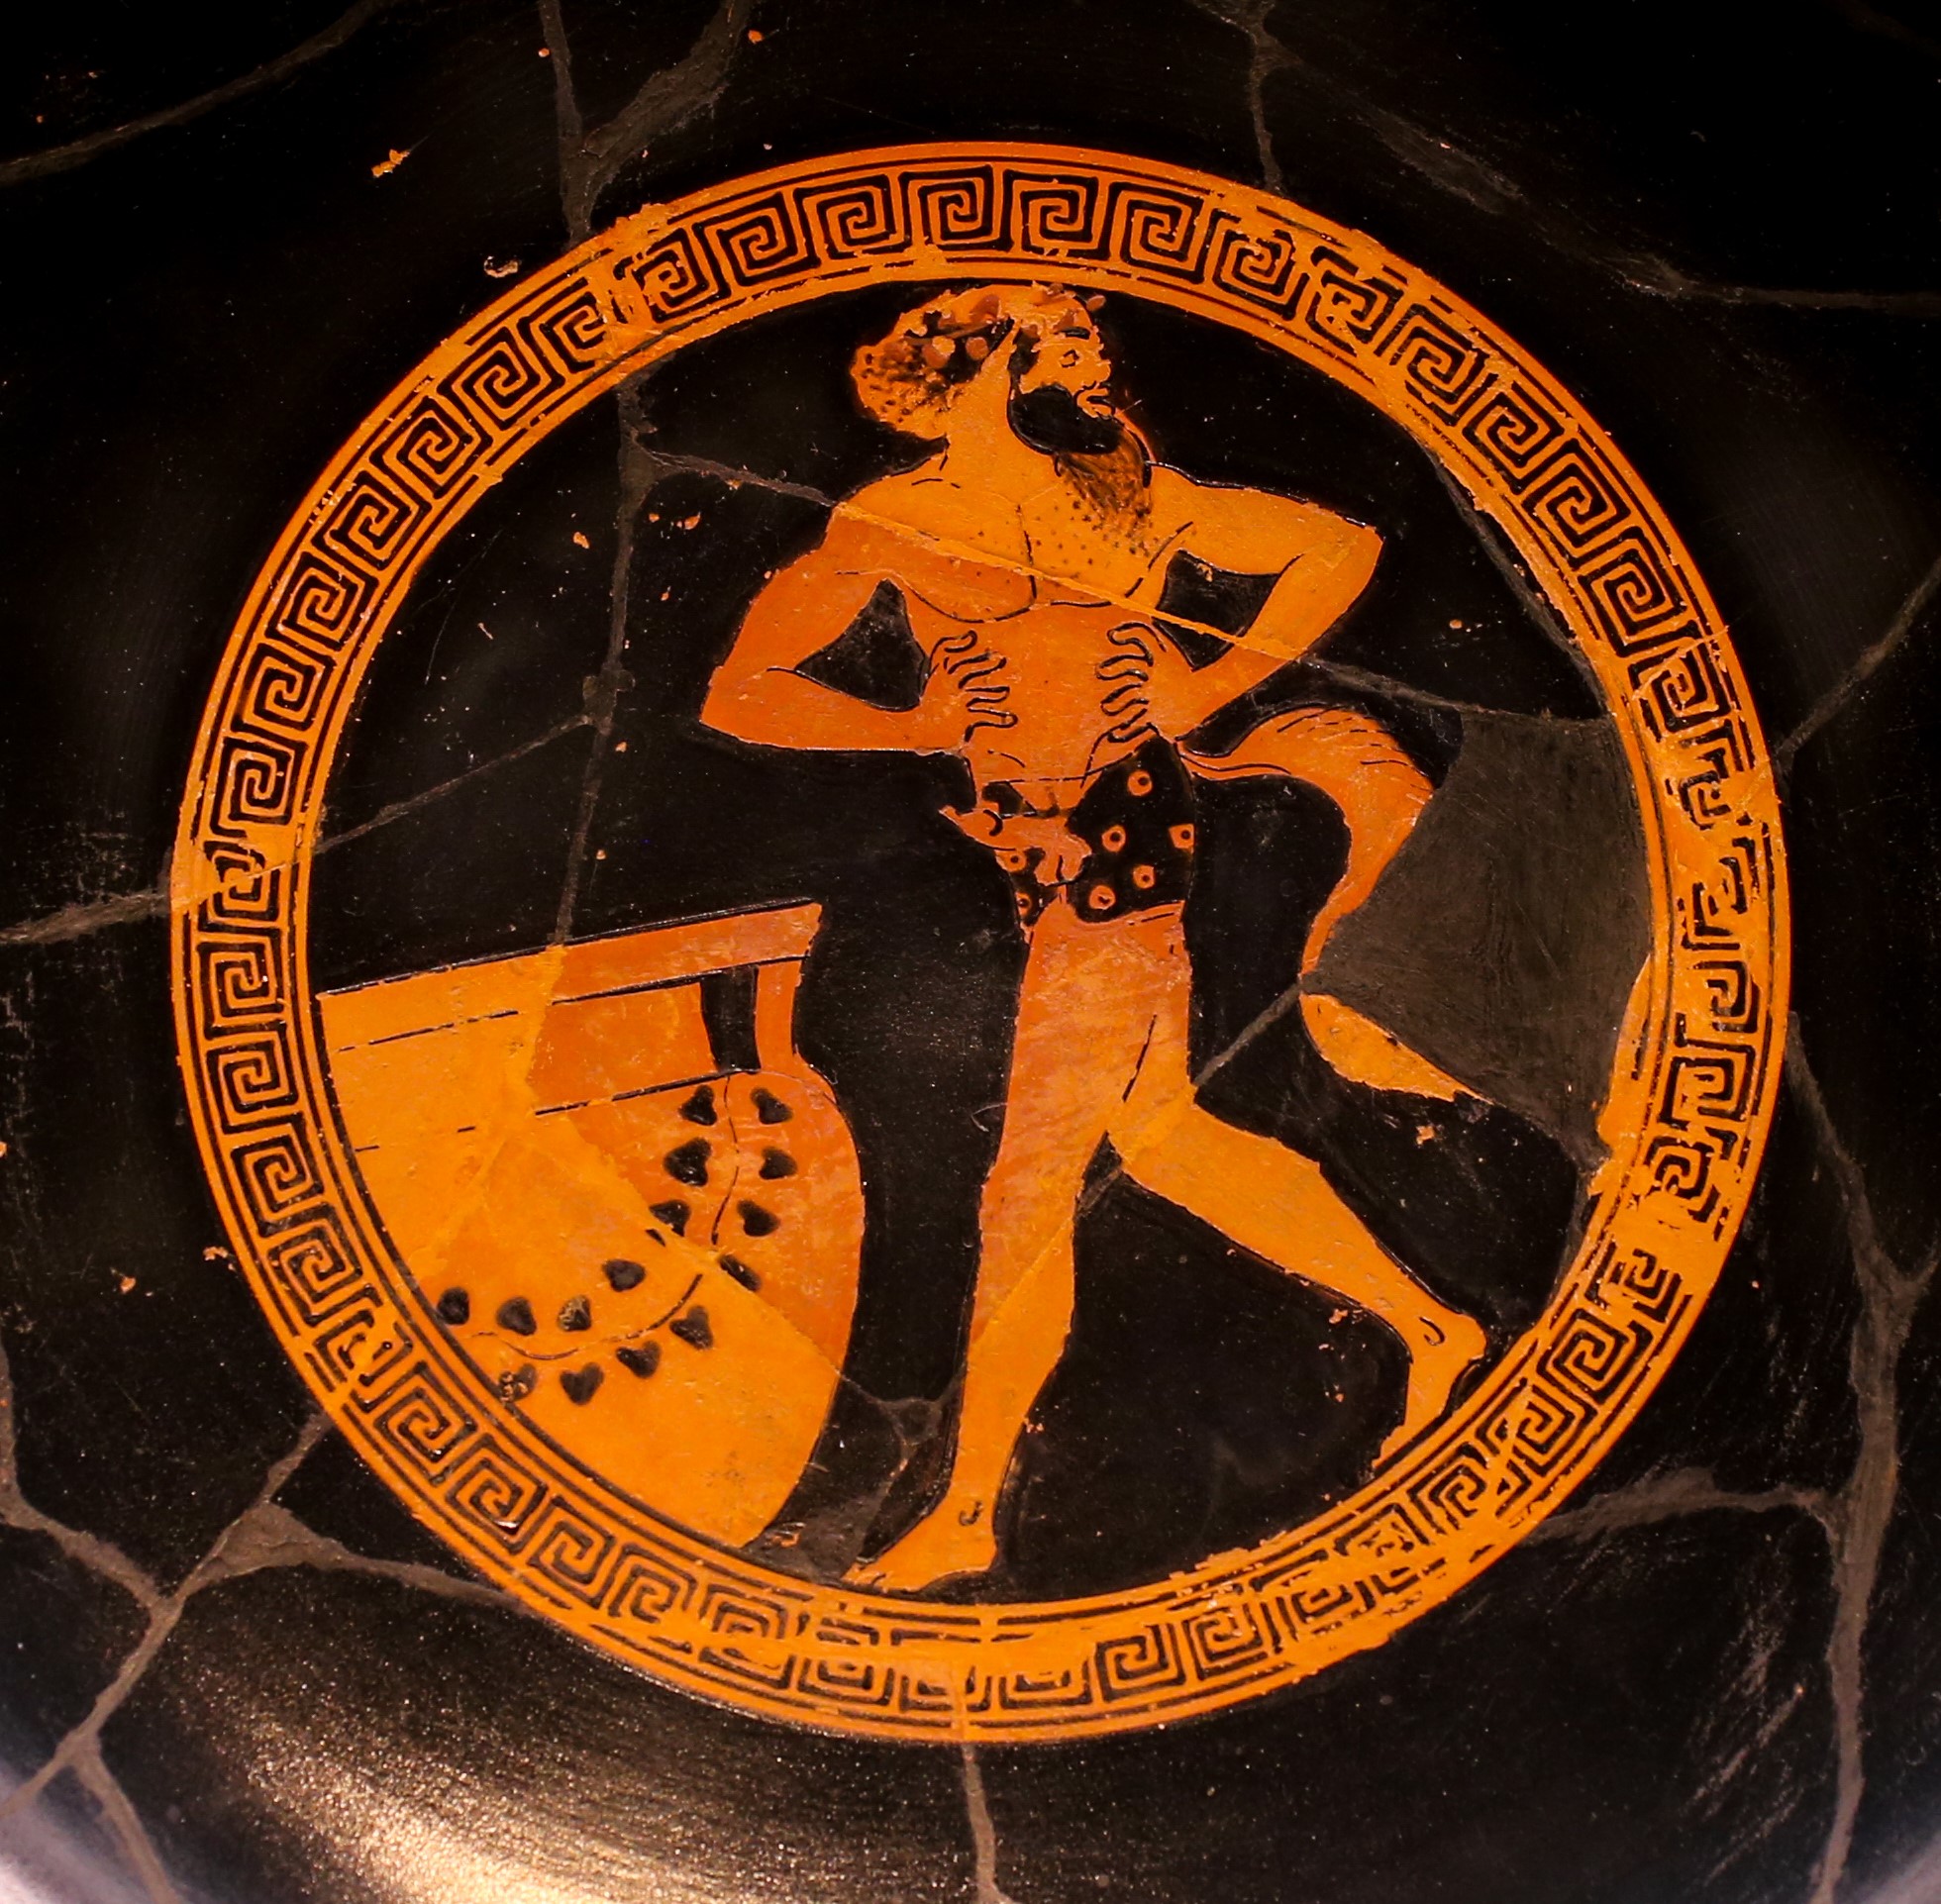 A bearded actor dressed as an ithyphallic satyr, with a tail attached to his waist by a belt. He is walking with his hands on his hips and head turned to look behind him. A large jar stands on the ground in front of him.